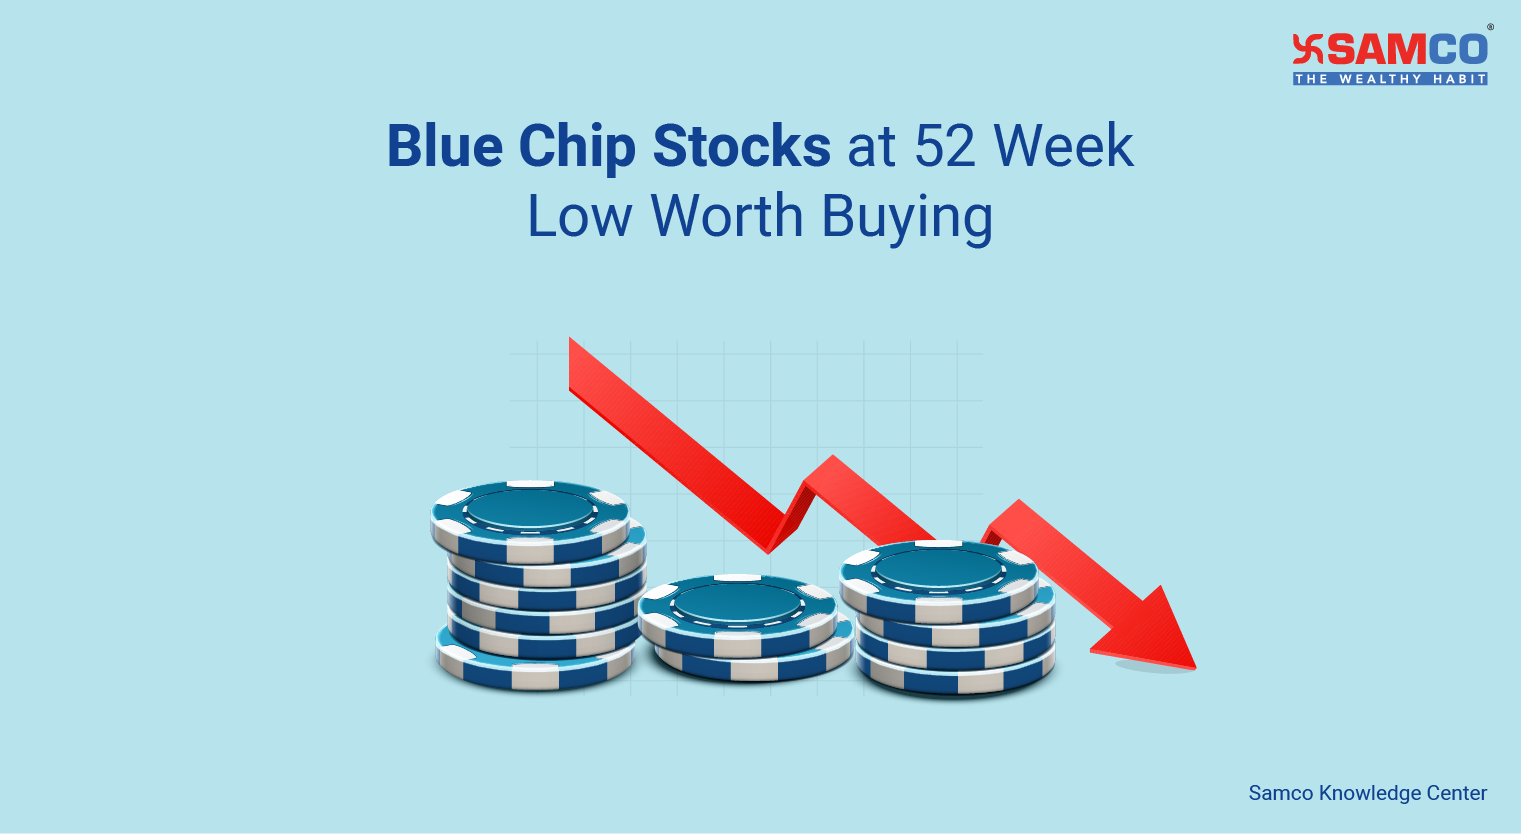 Blue Chip Stocks at 52 Week Low Worth Buying